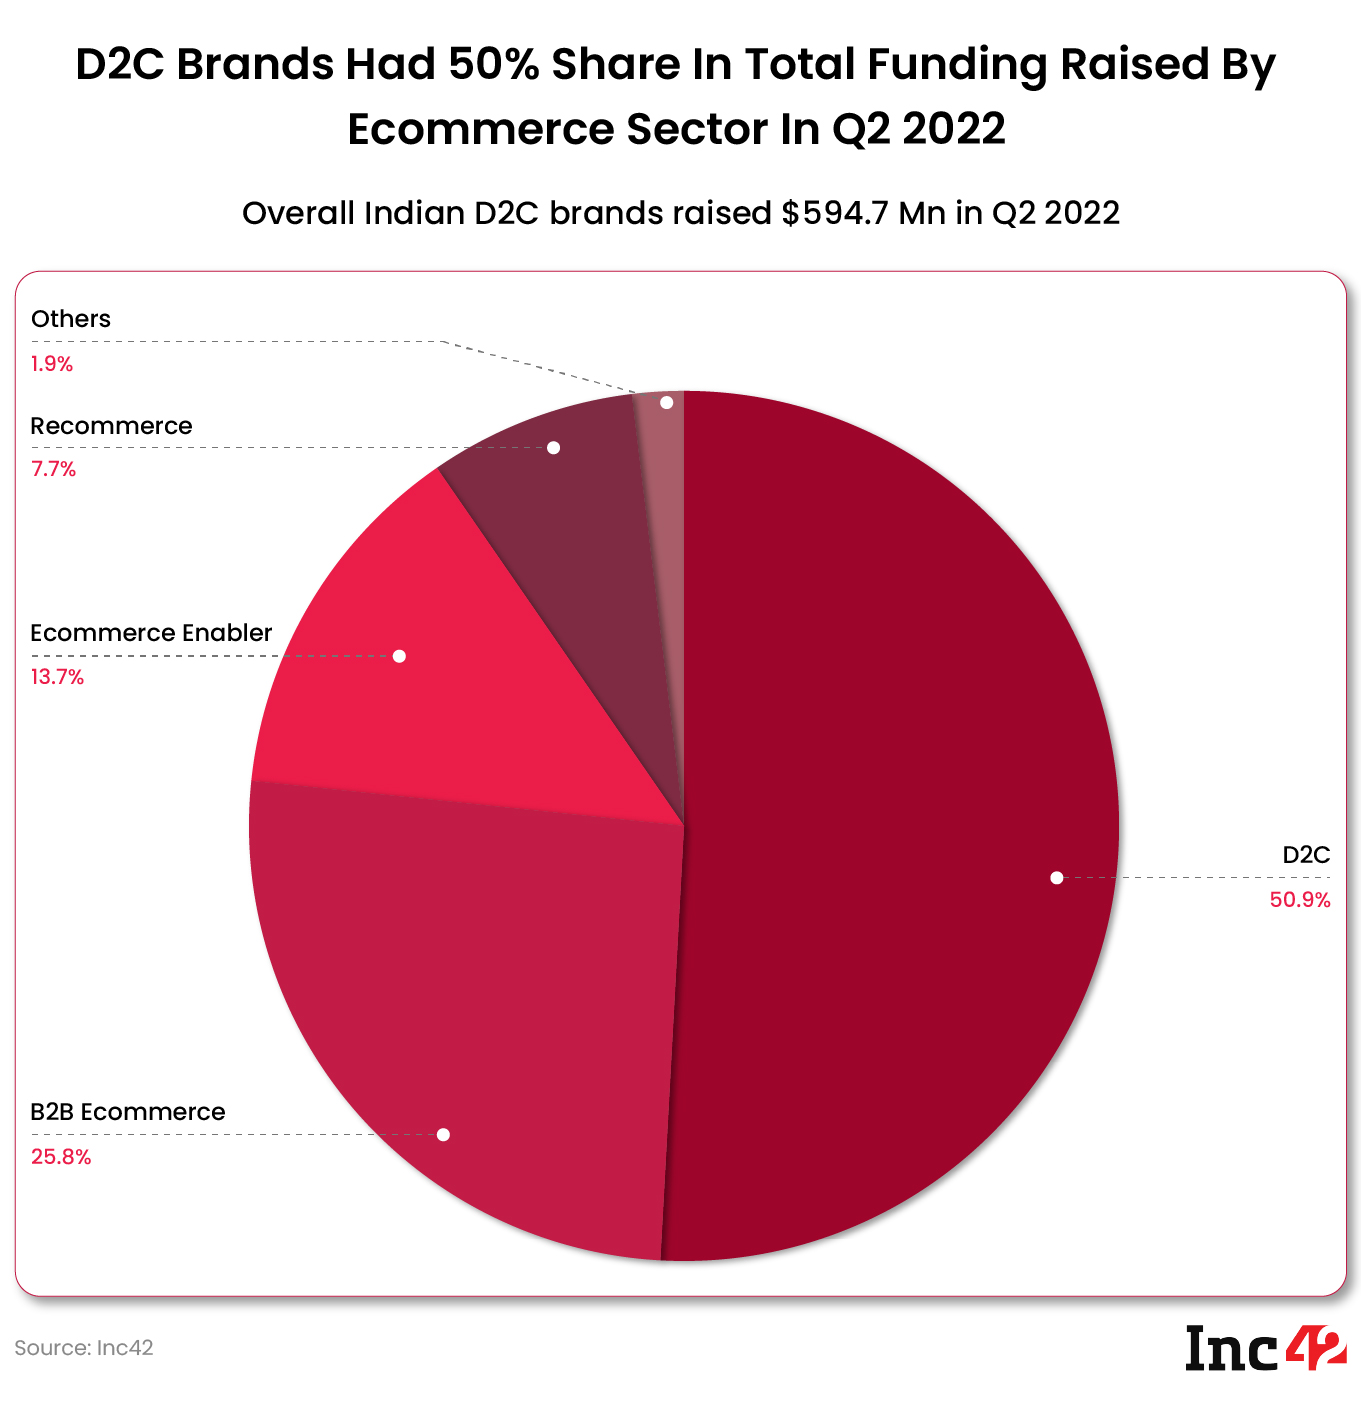 D2C saw the most funding inflow